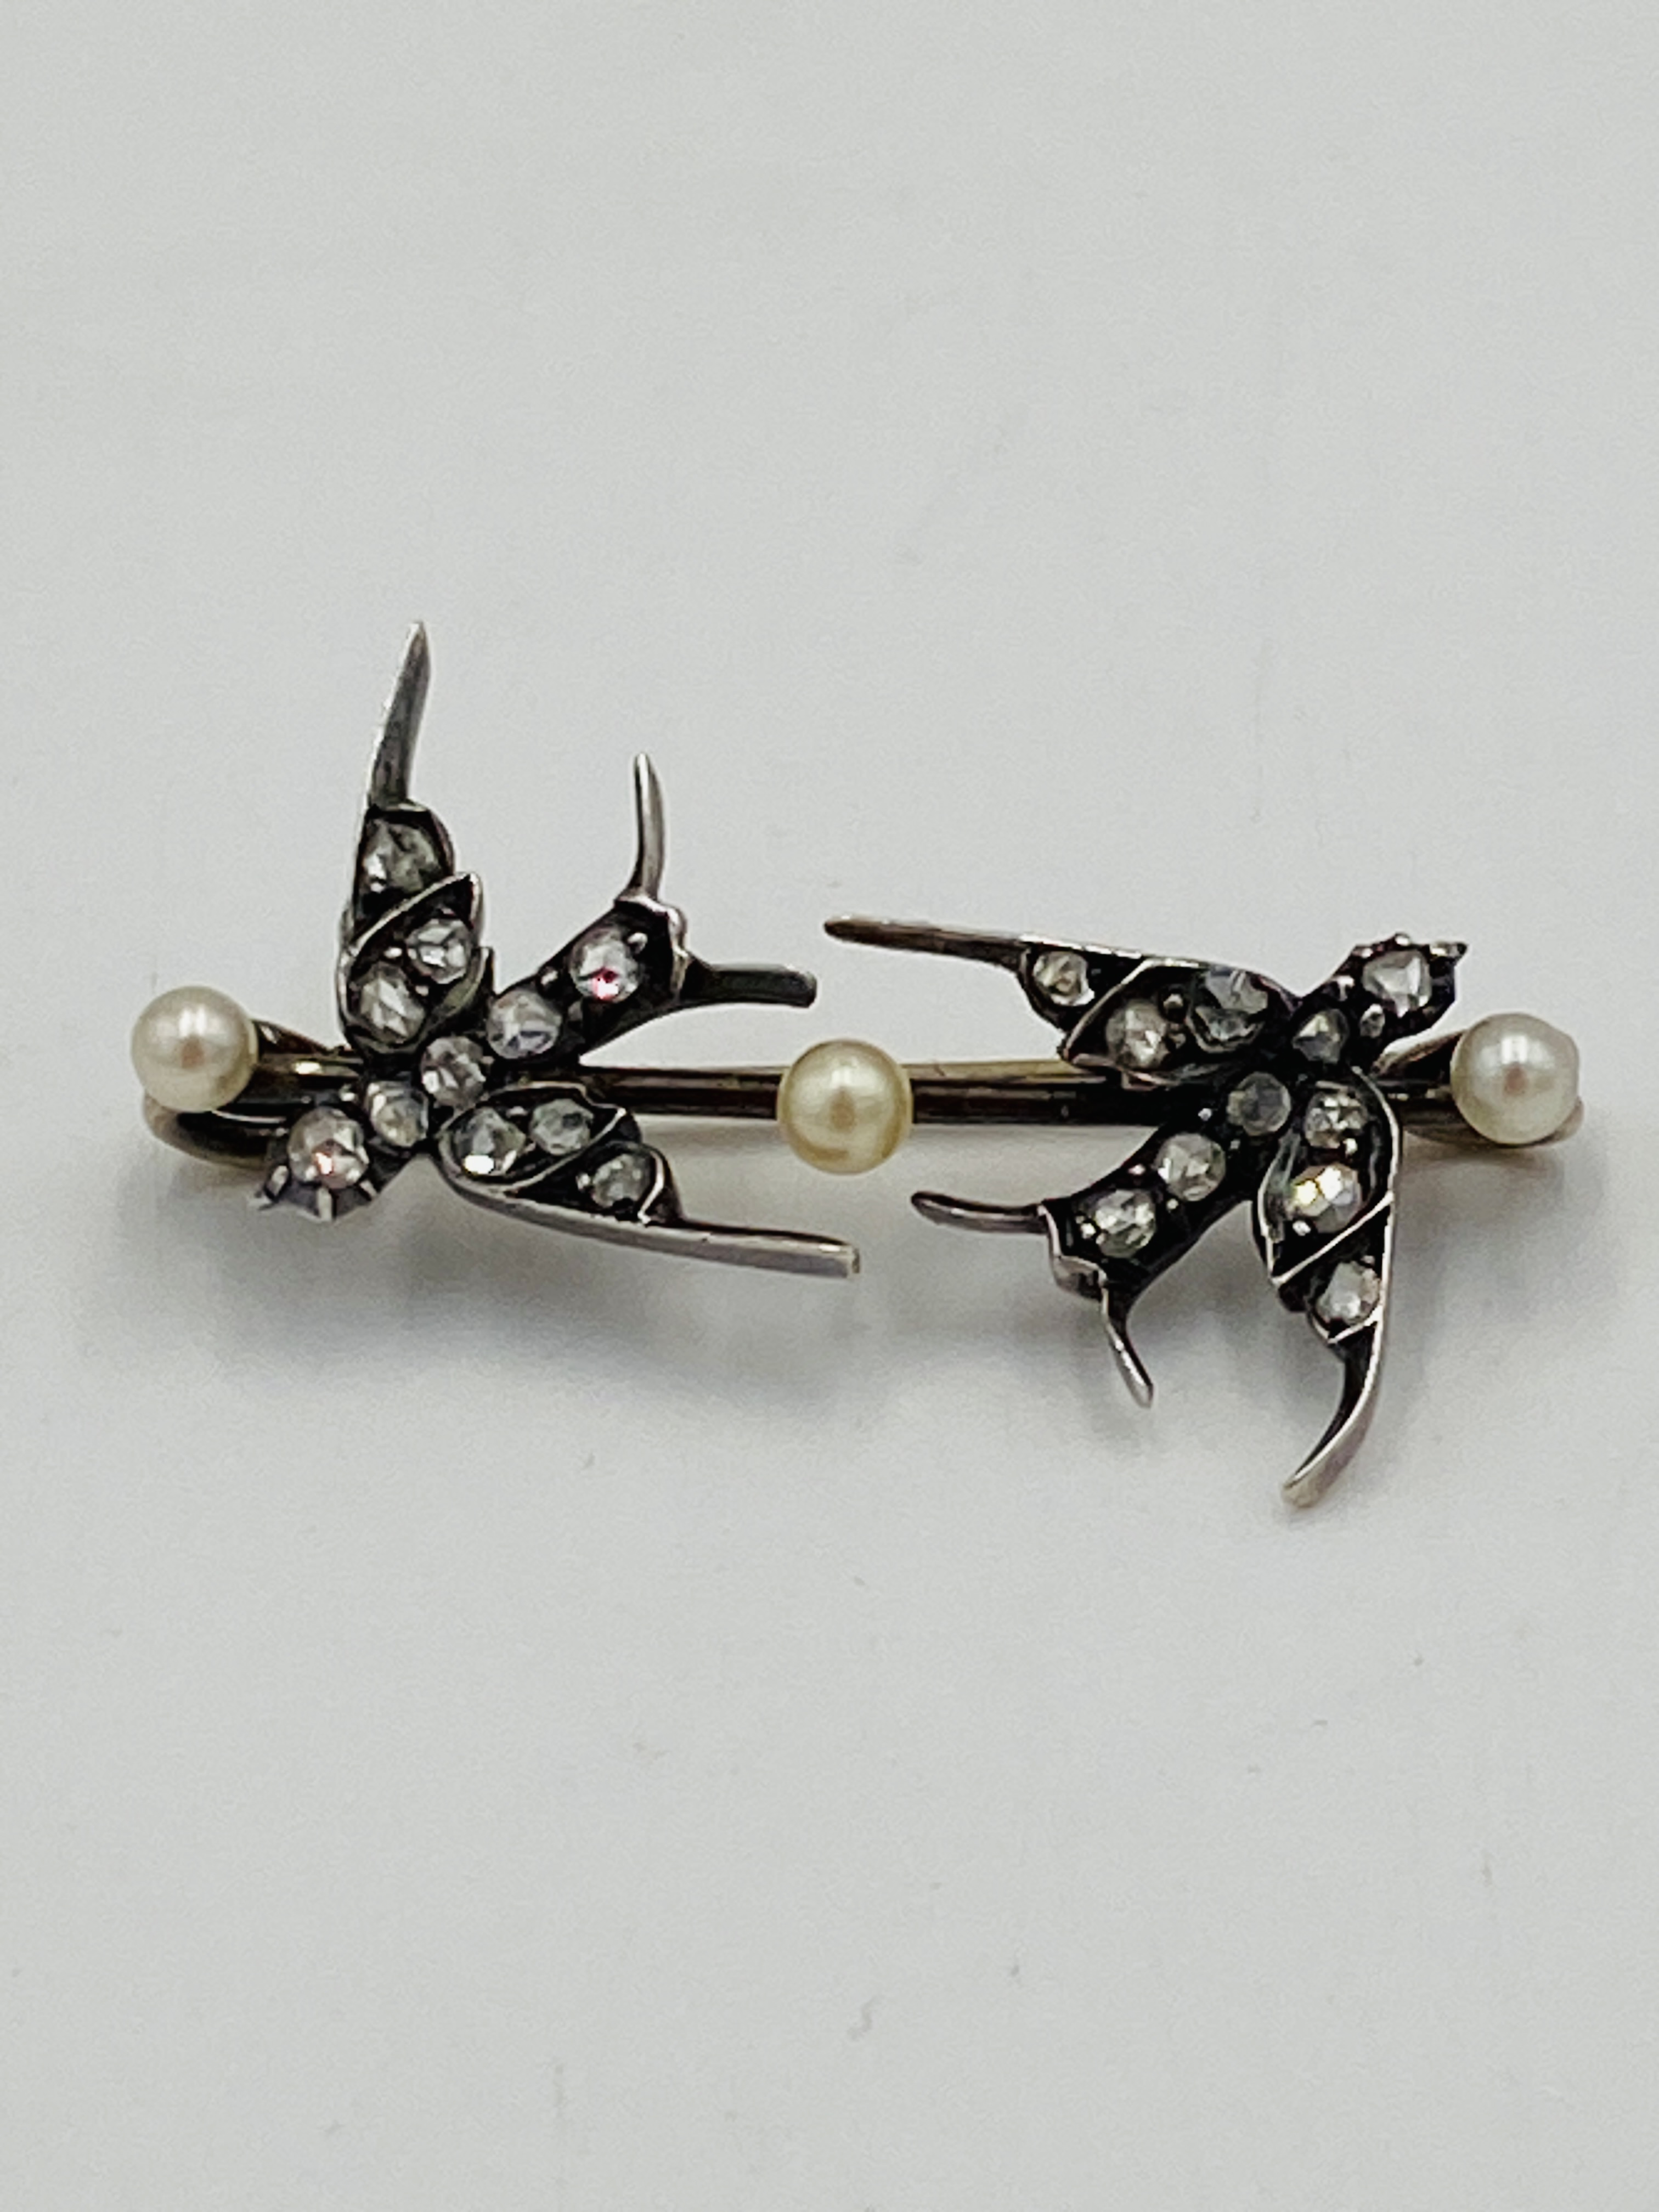 Diamond and pearl set brooch styled as a bird - Image 5 of 5